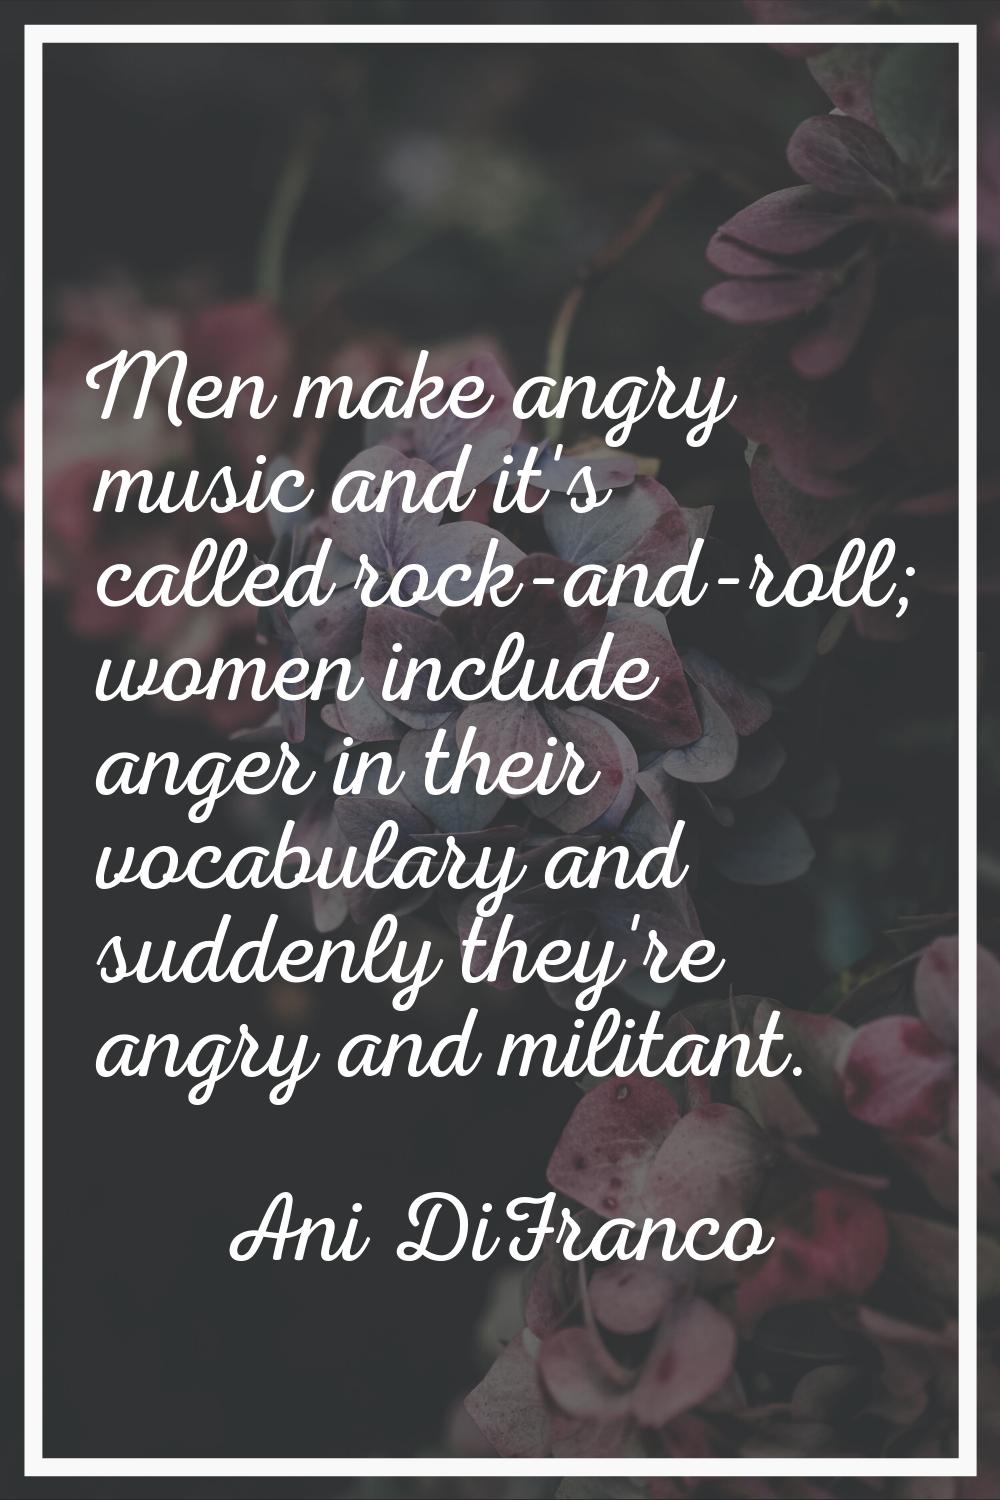 Men make angry music and it's called rock-and-roll; women include anger in their vocabulary and sud